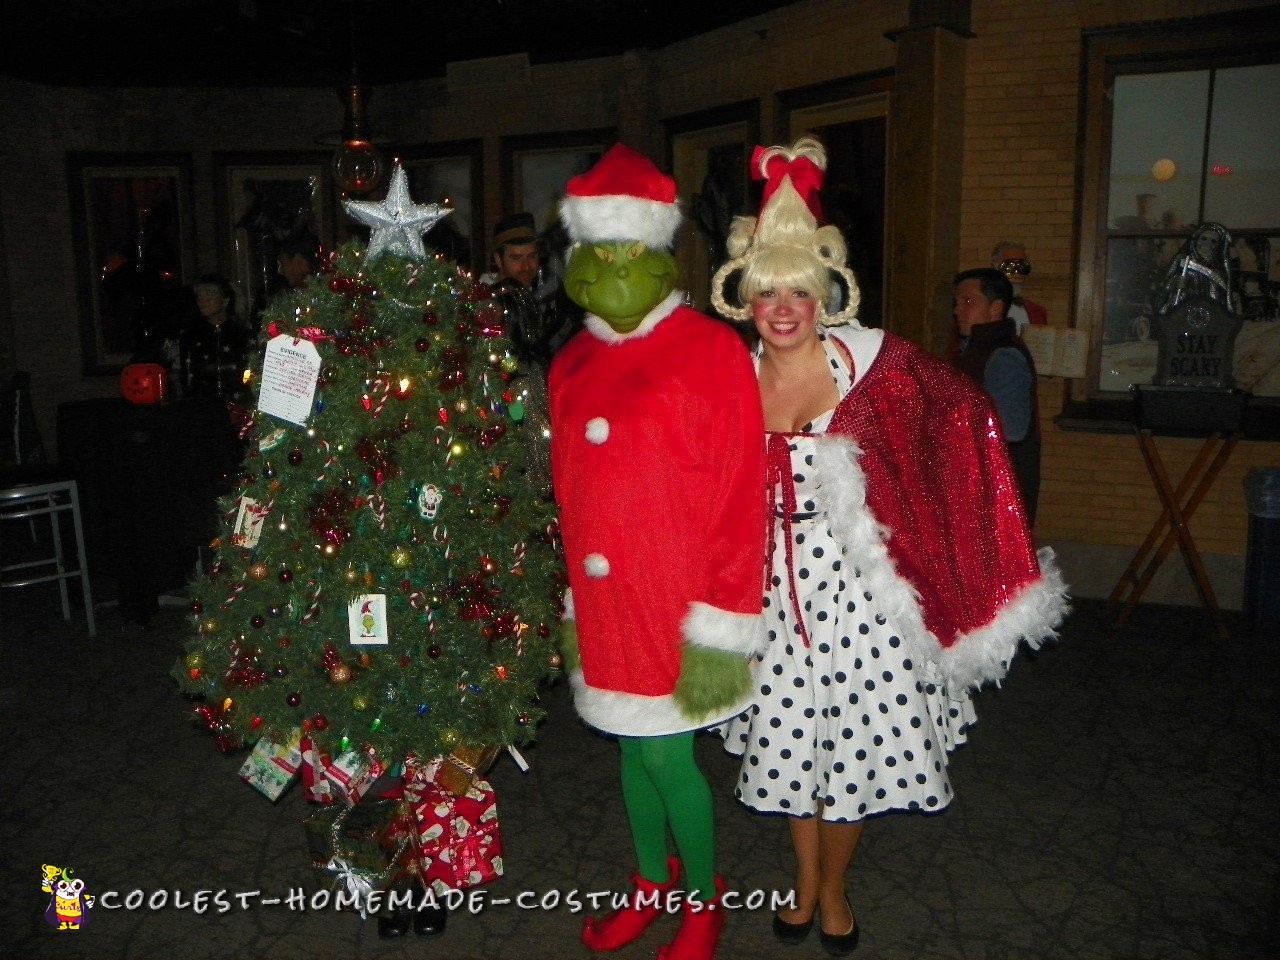 Christmas Tree, Cindy Lou Who and The Grinch Costumes